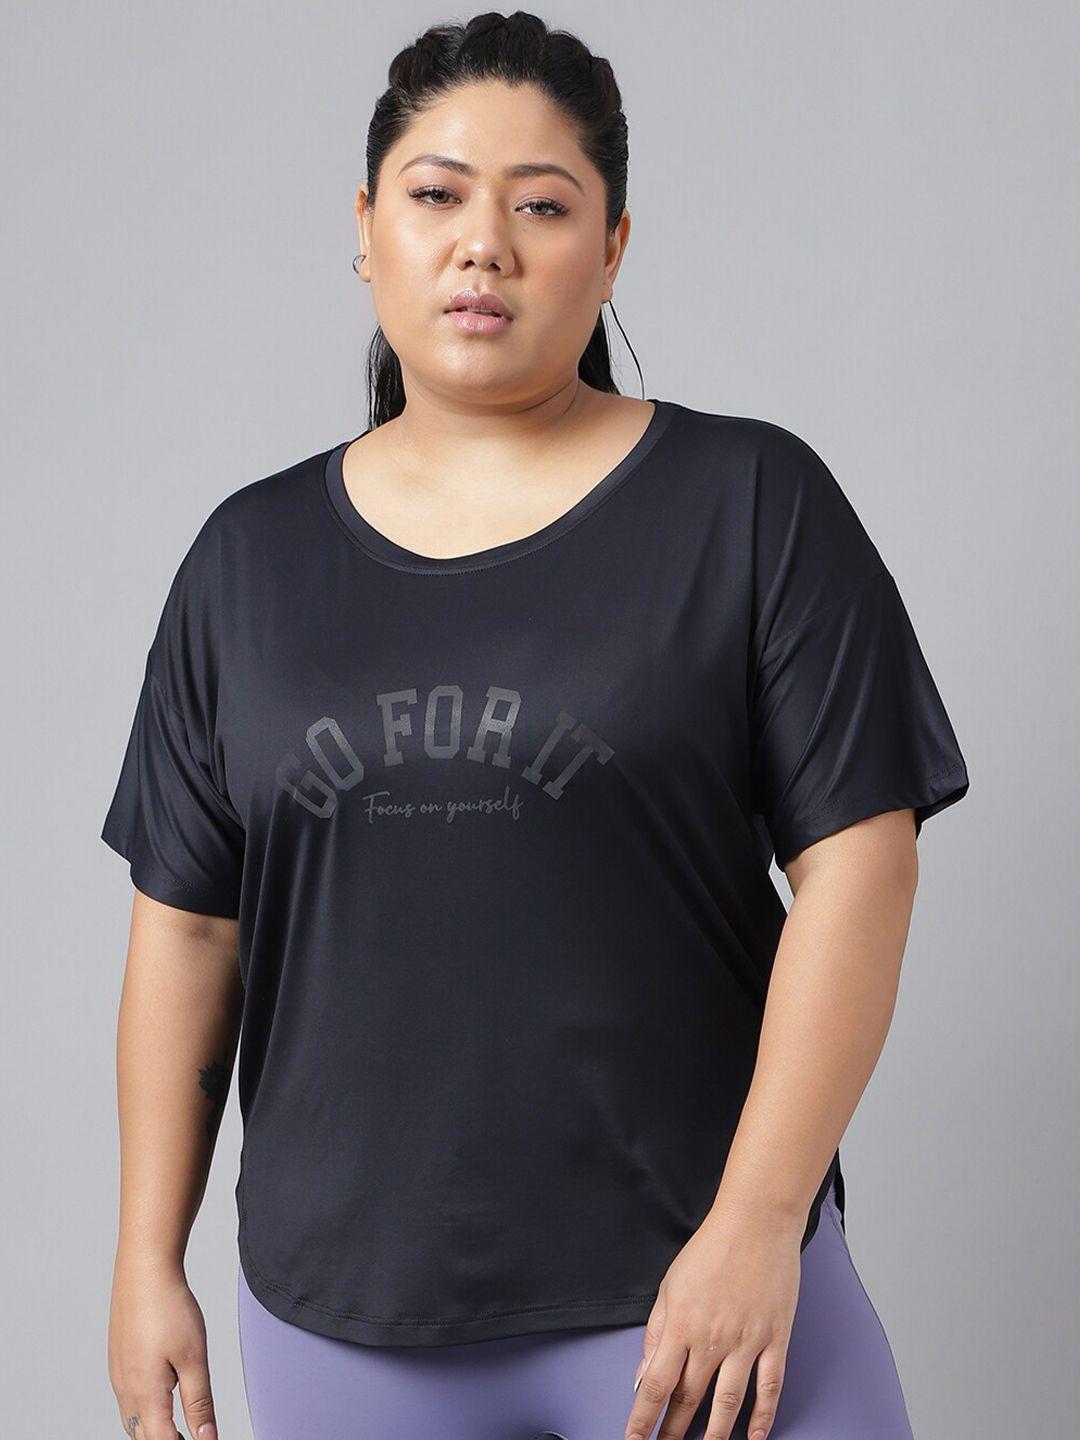 mkh plus size relaxed fit typography printed round neck short sleeve dri-fit t-shirt